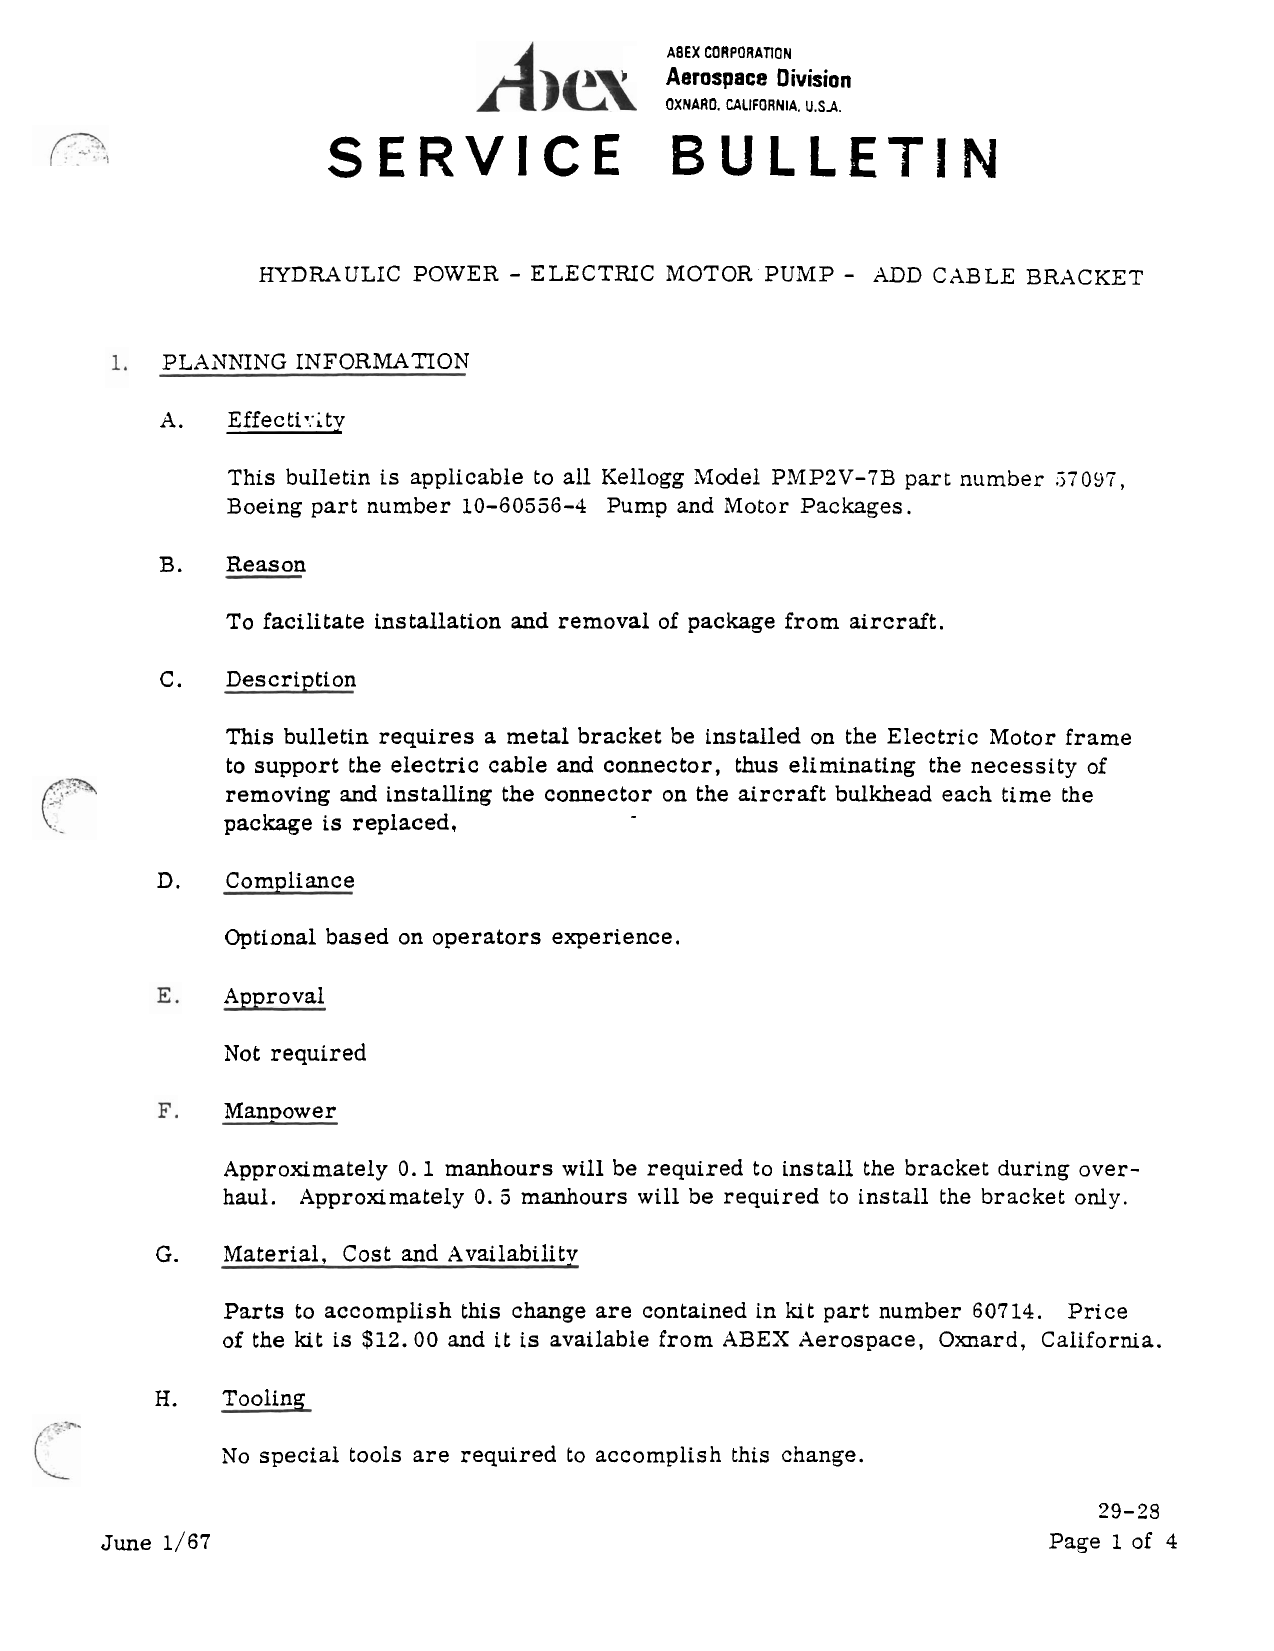 Sample page 1 from AirCorps Library document: Add Cable Bracket for Hydraulic Power Electric Motor Pump